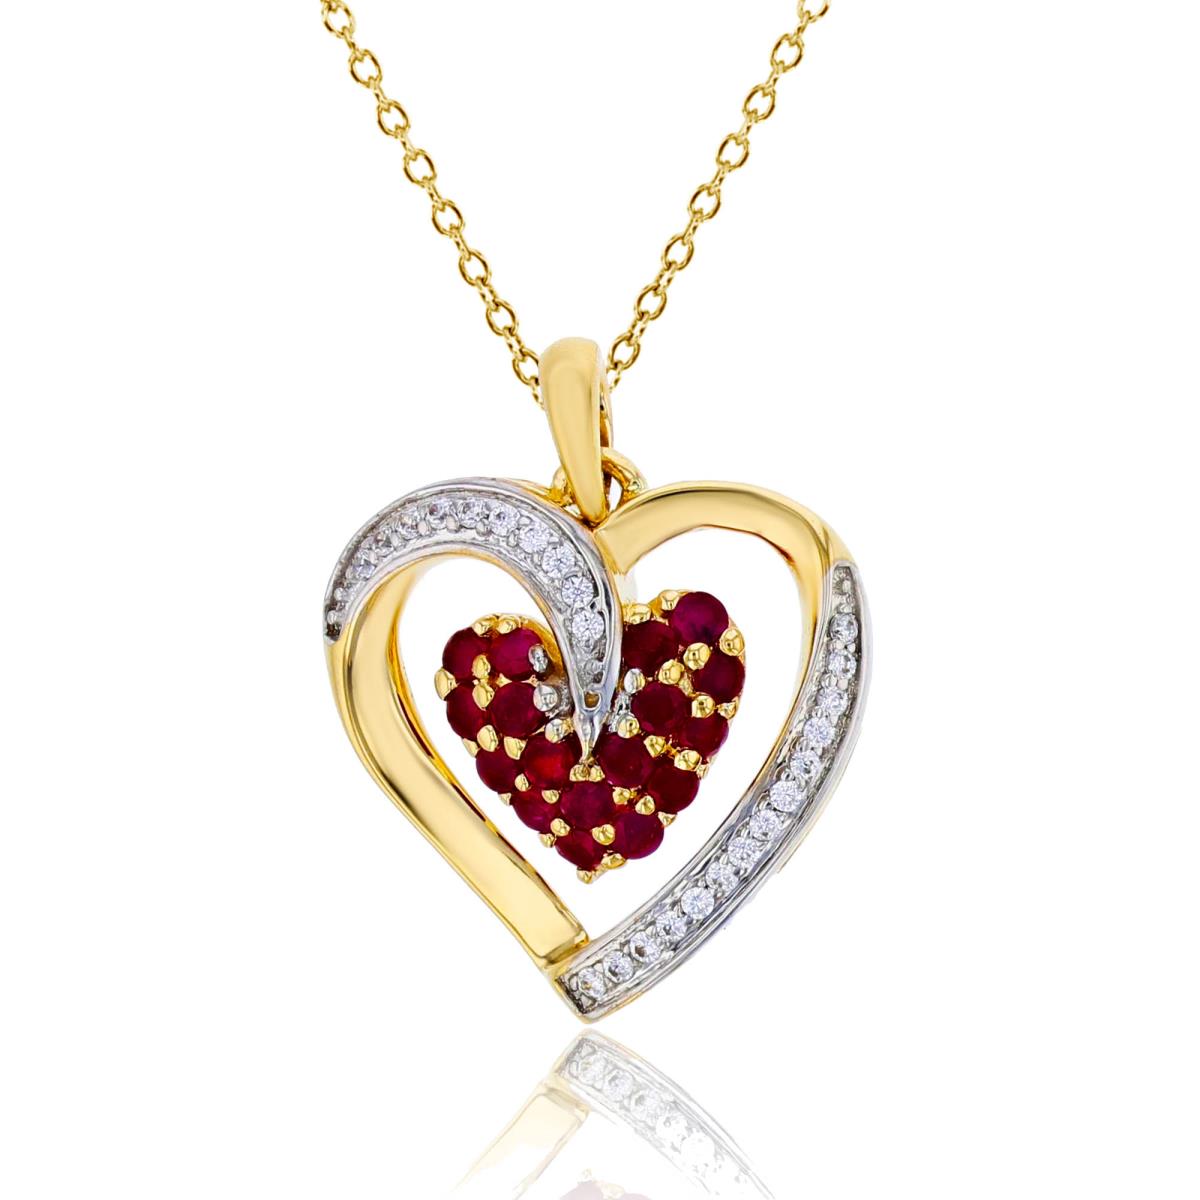 14K Yellow Gold 0.07cttw Rnd Diamonds & Rnd Ruby Heart 18"Necklace